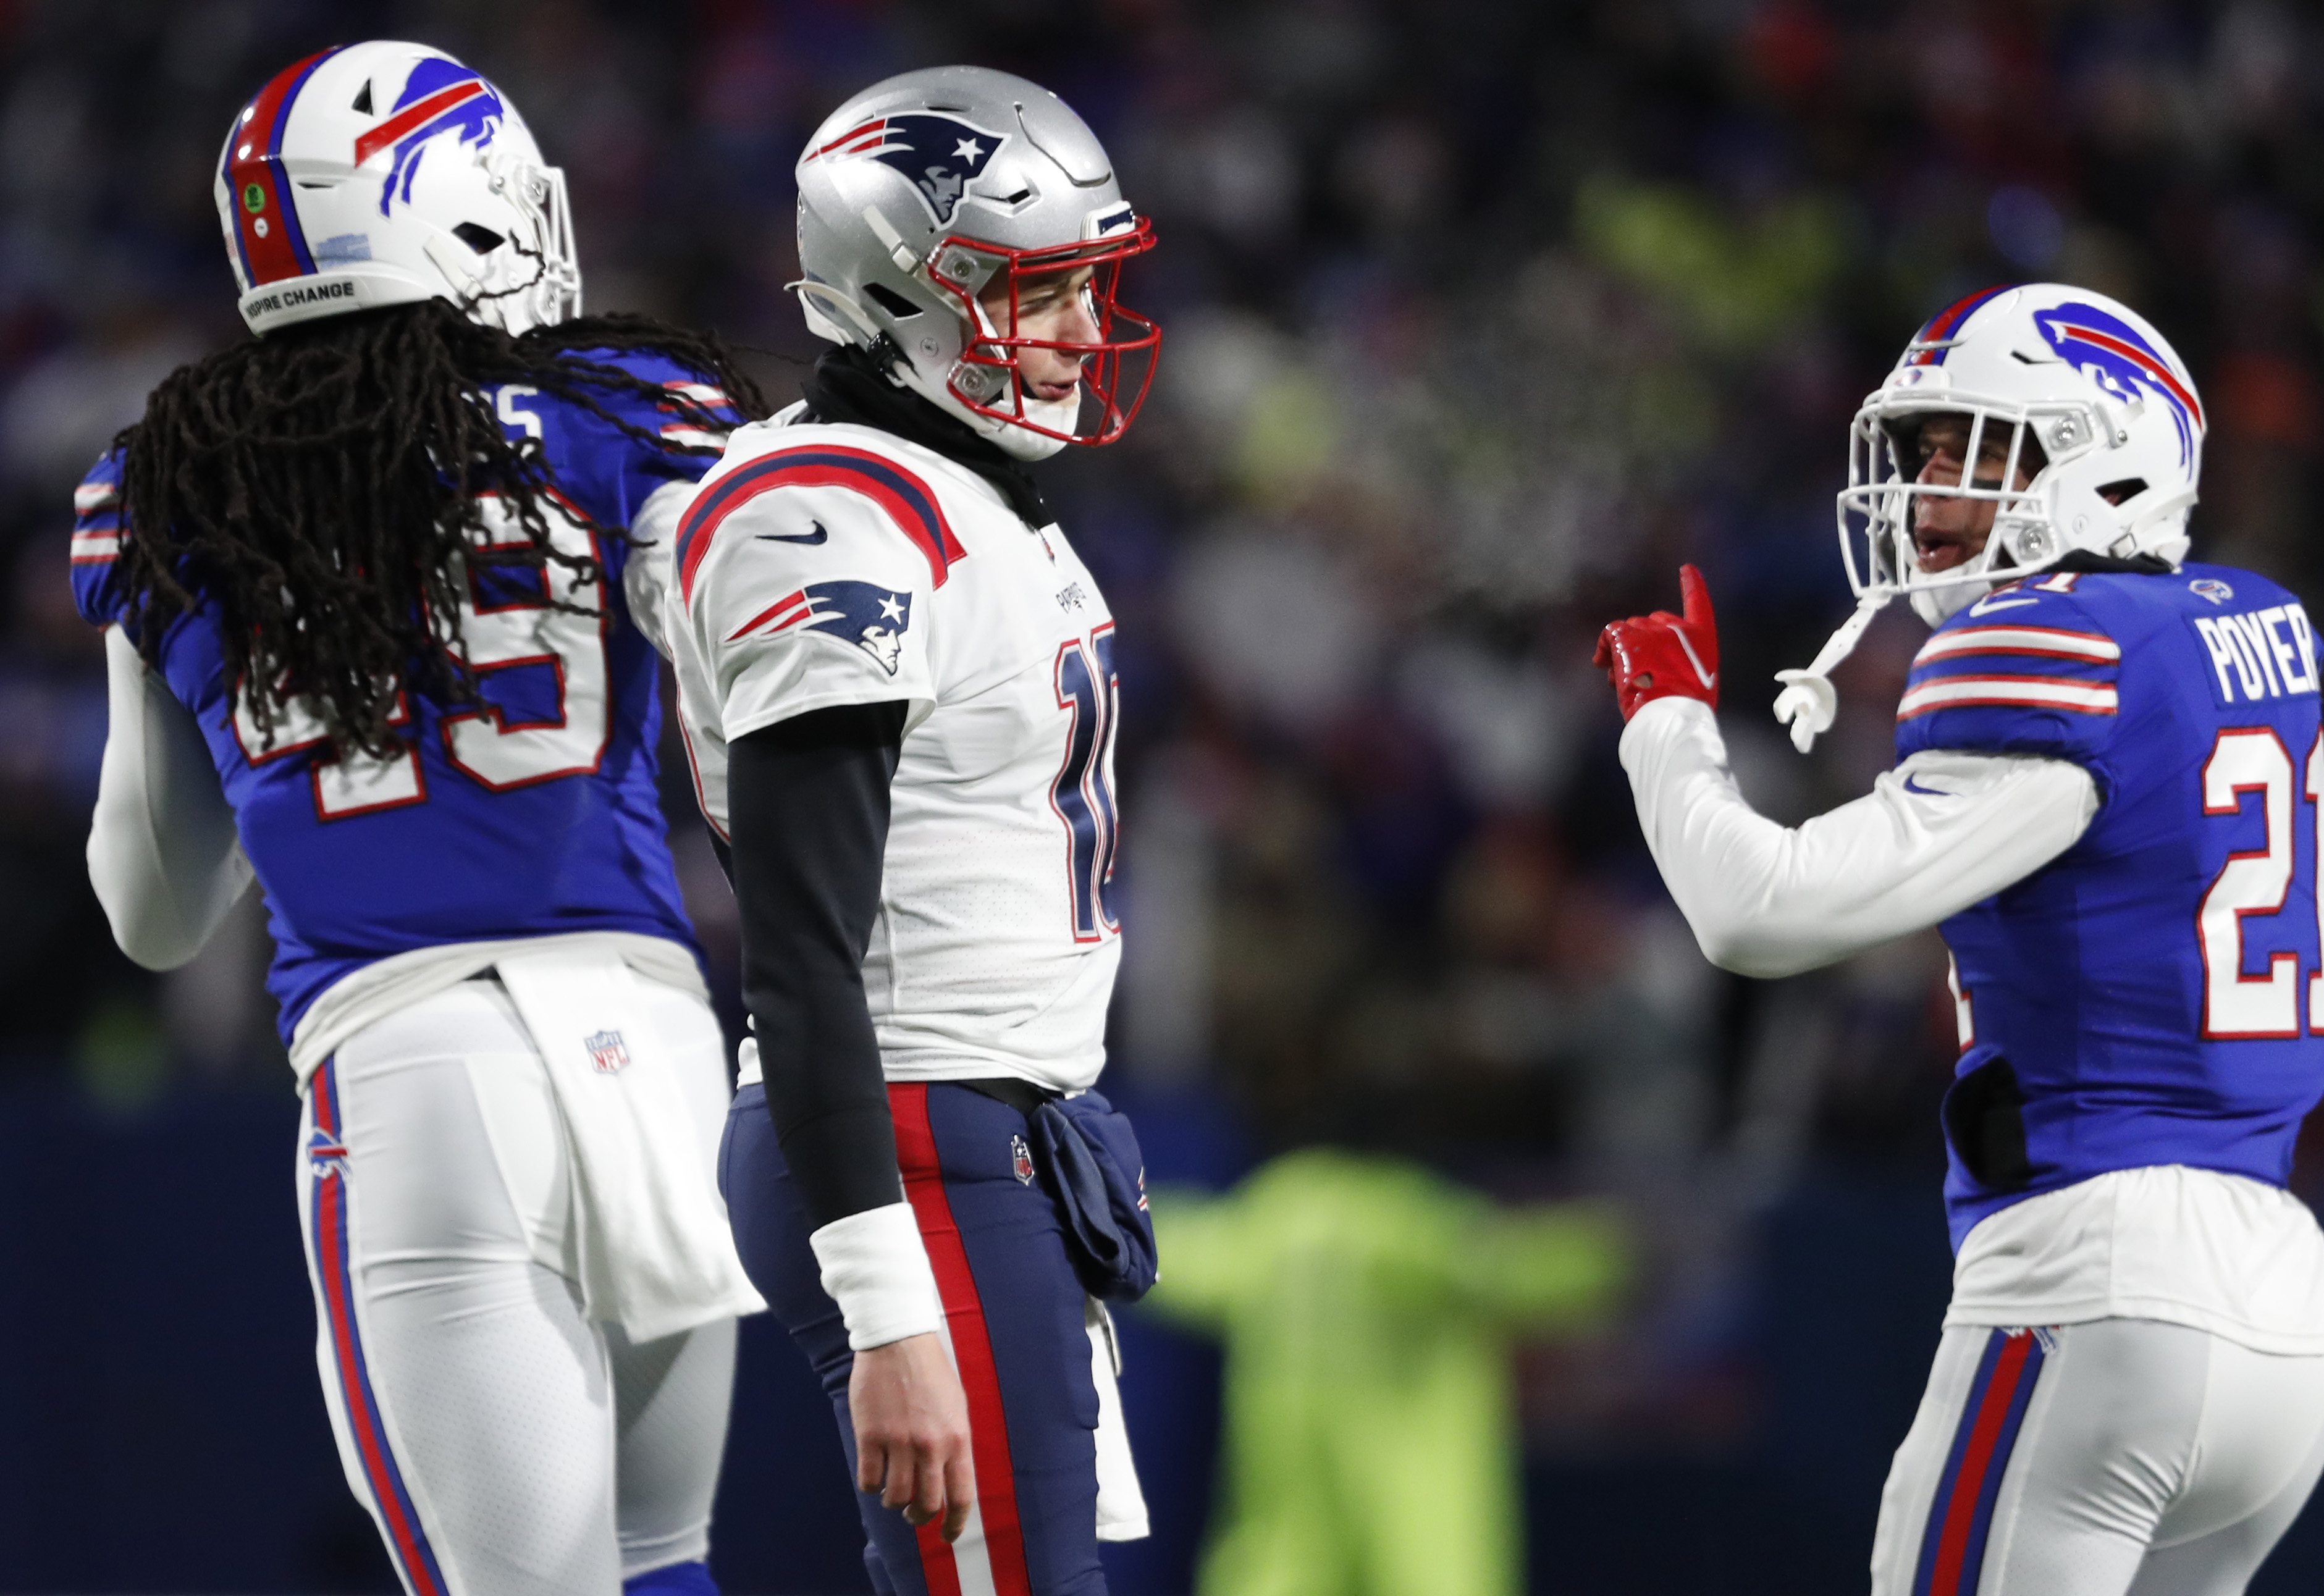 NFL playoff schedule: Patriots to play Bills in the wild card round - Pats  Pulpit